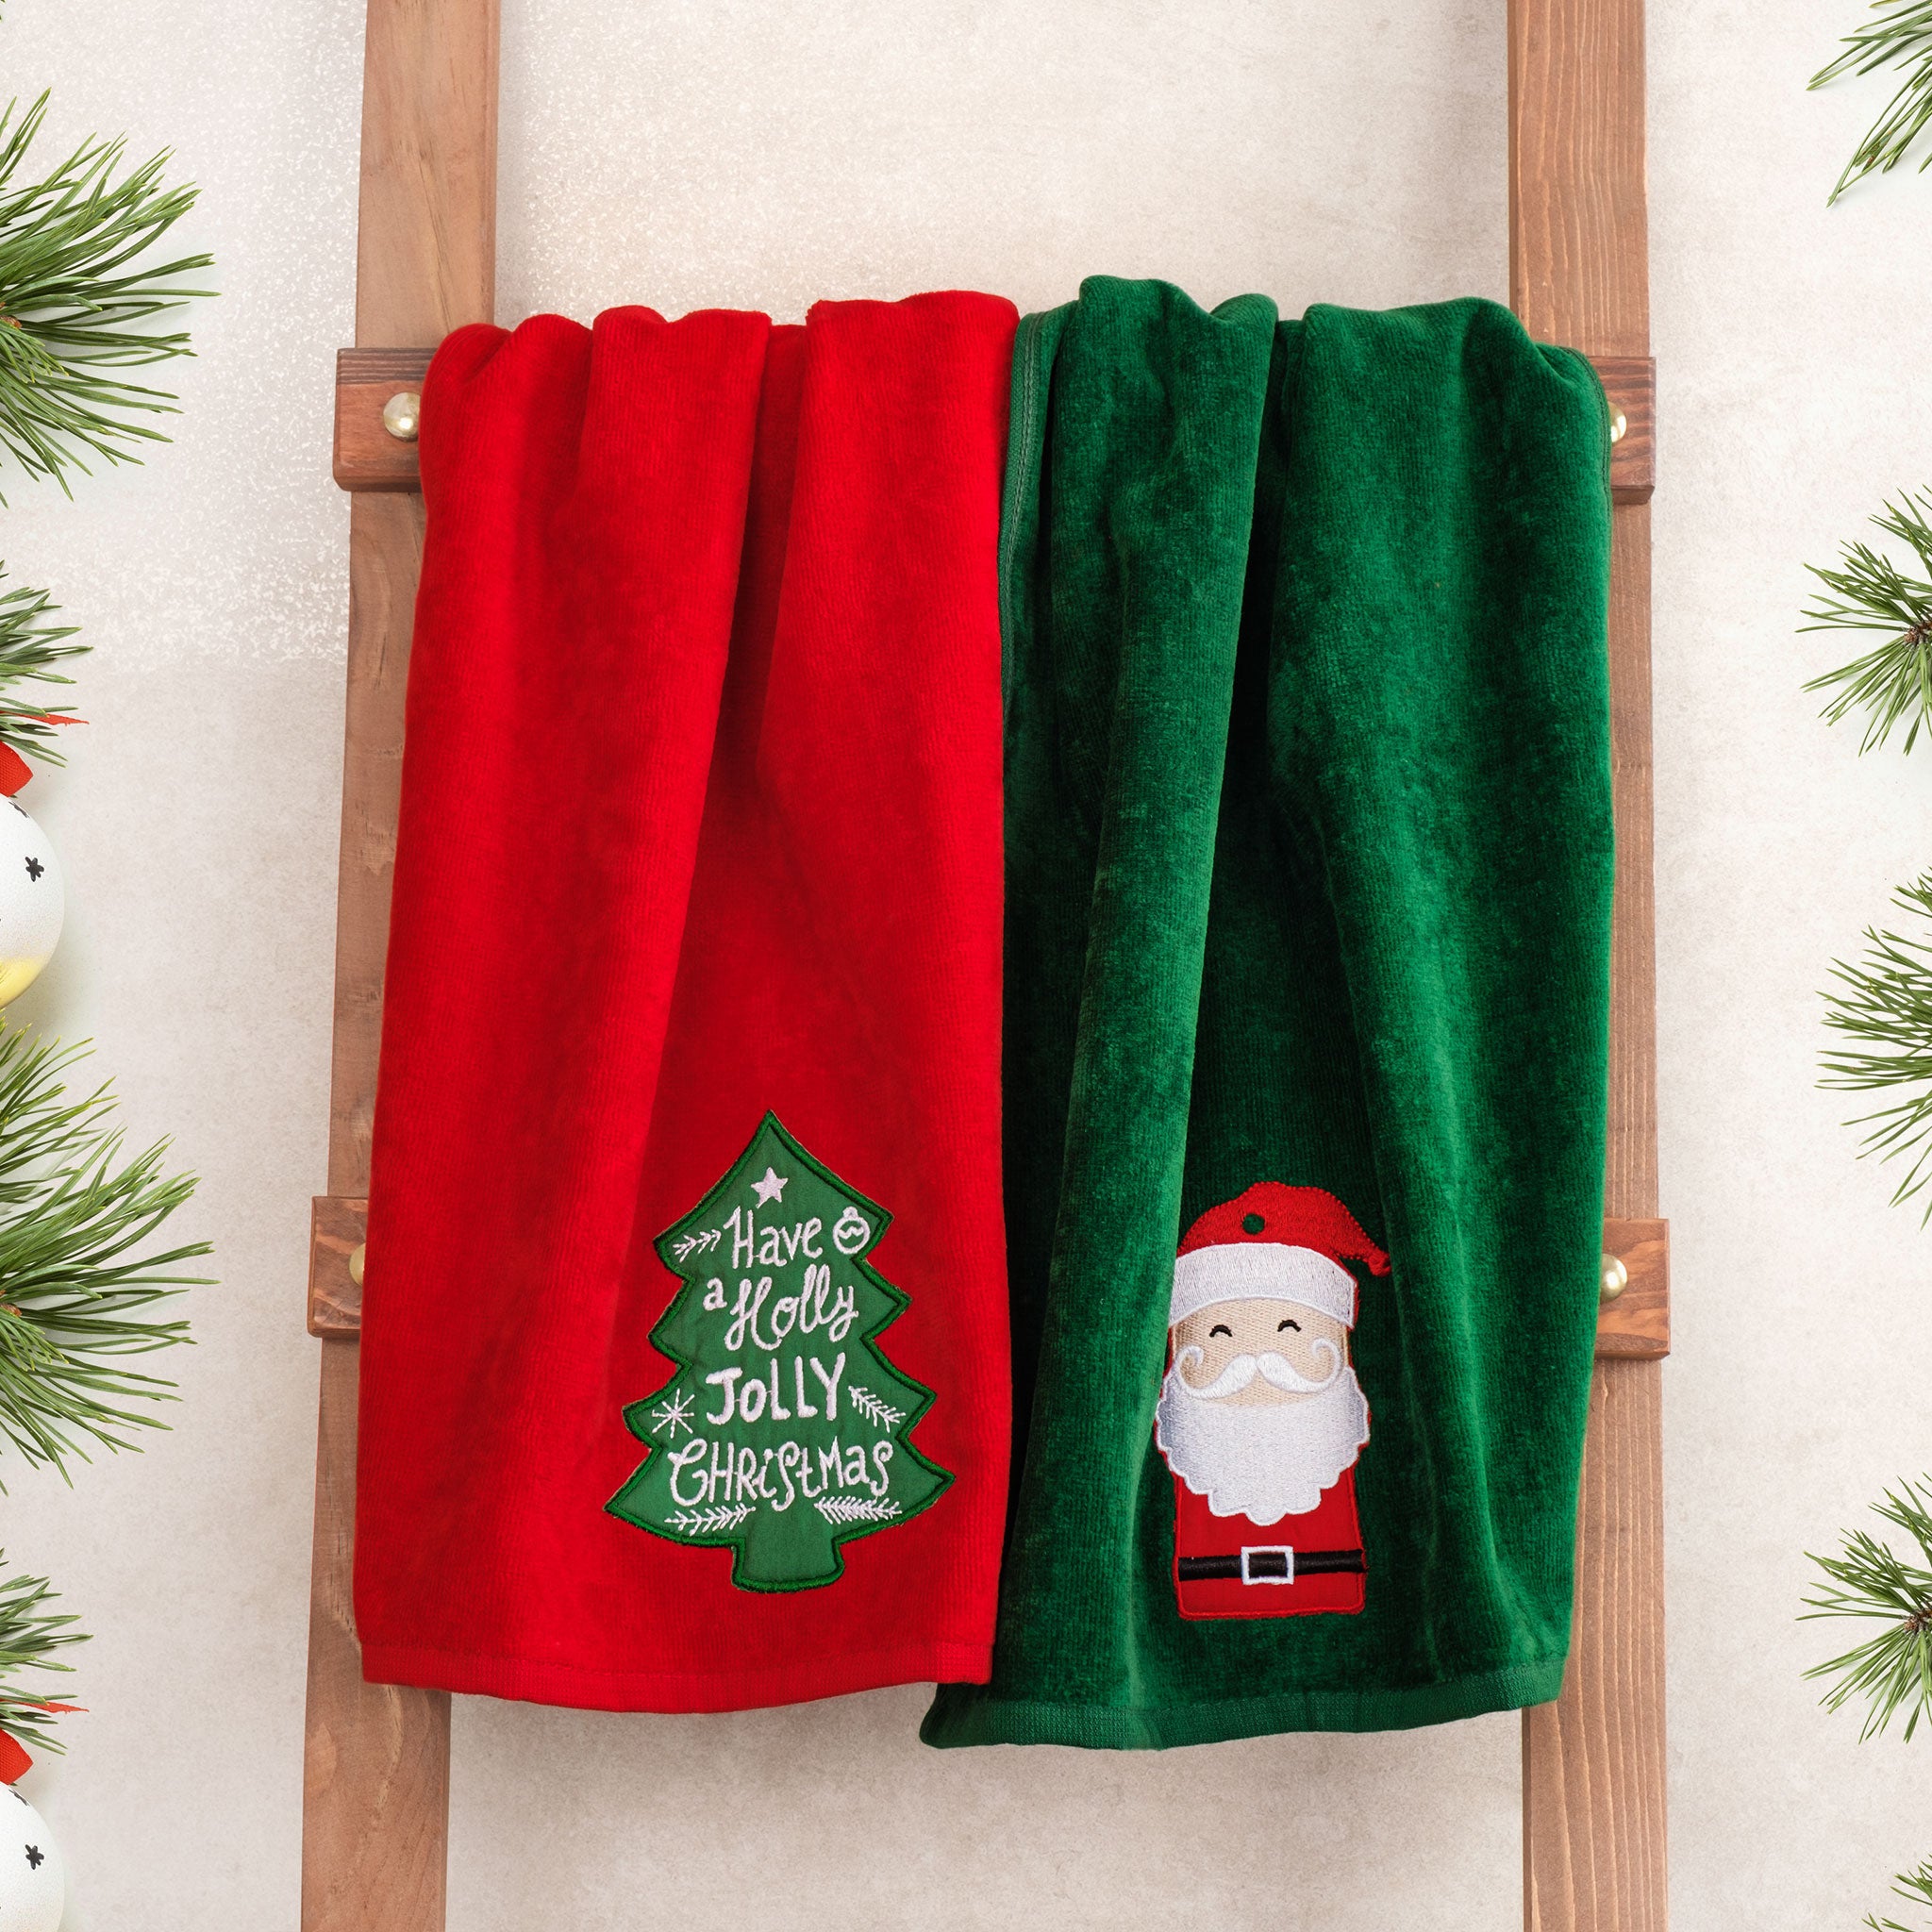 American Soft Linen - Christmas Towels 2  Packed Embroidered Towels for Decor Xmas - 60 Set Case Pack - Santa-tree - 3